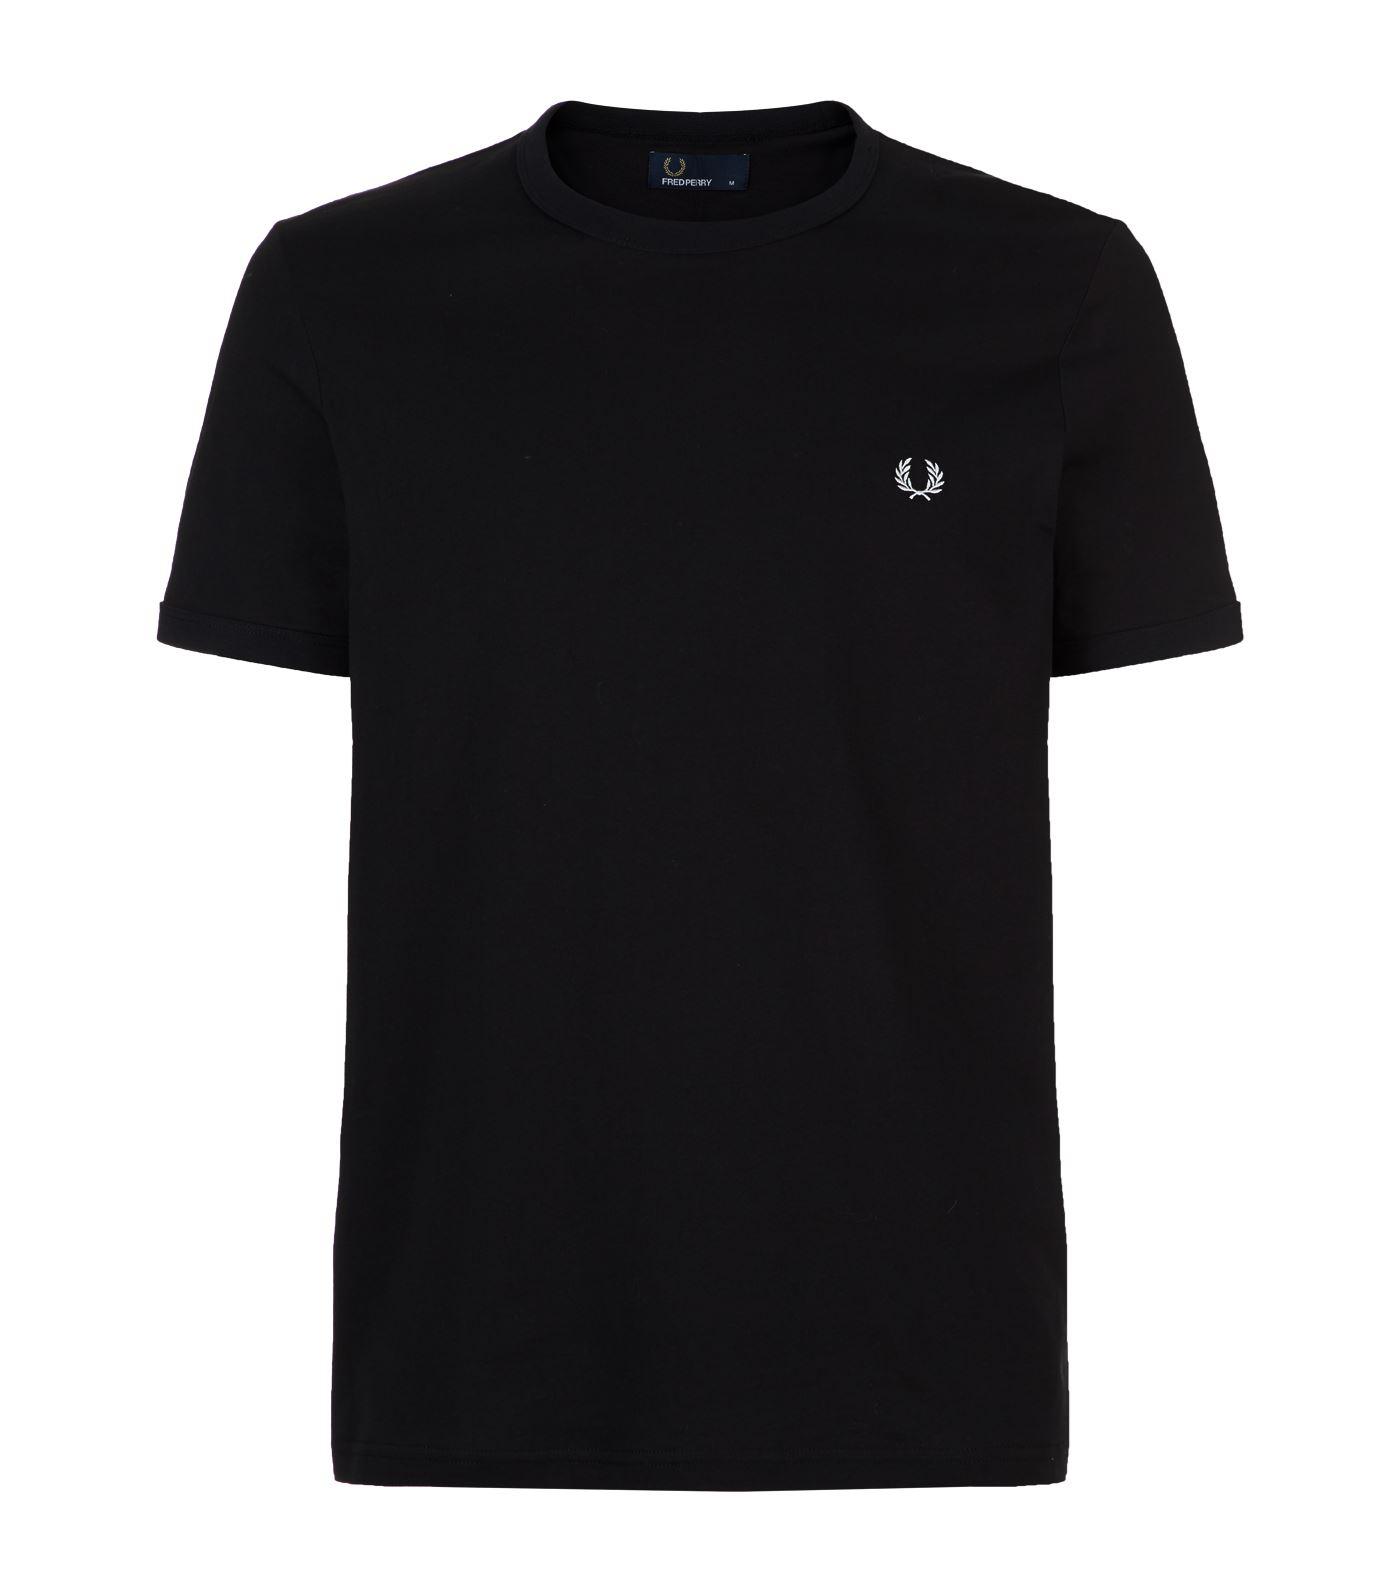 Lyst - Fred Perry Ringer T-shirt in Black for Men - Save 46%